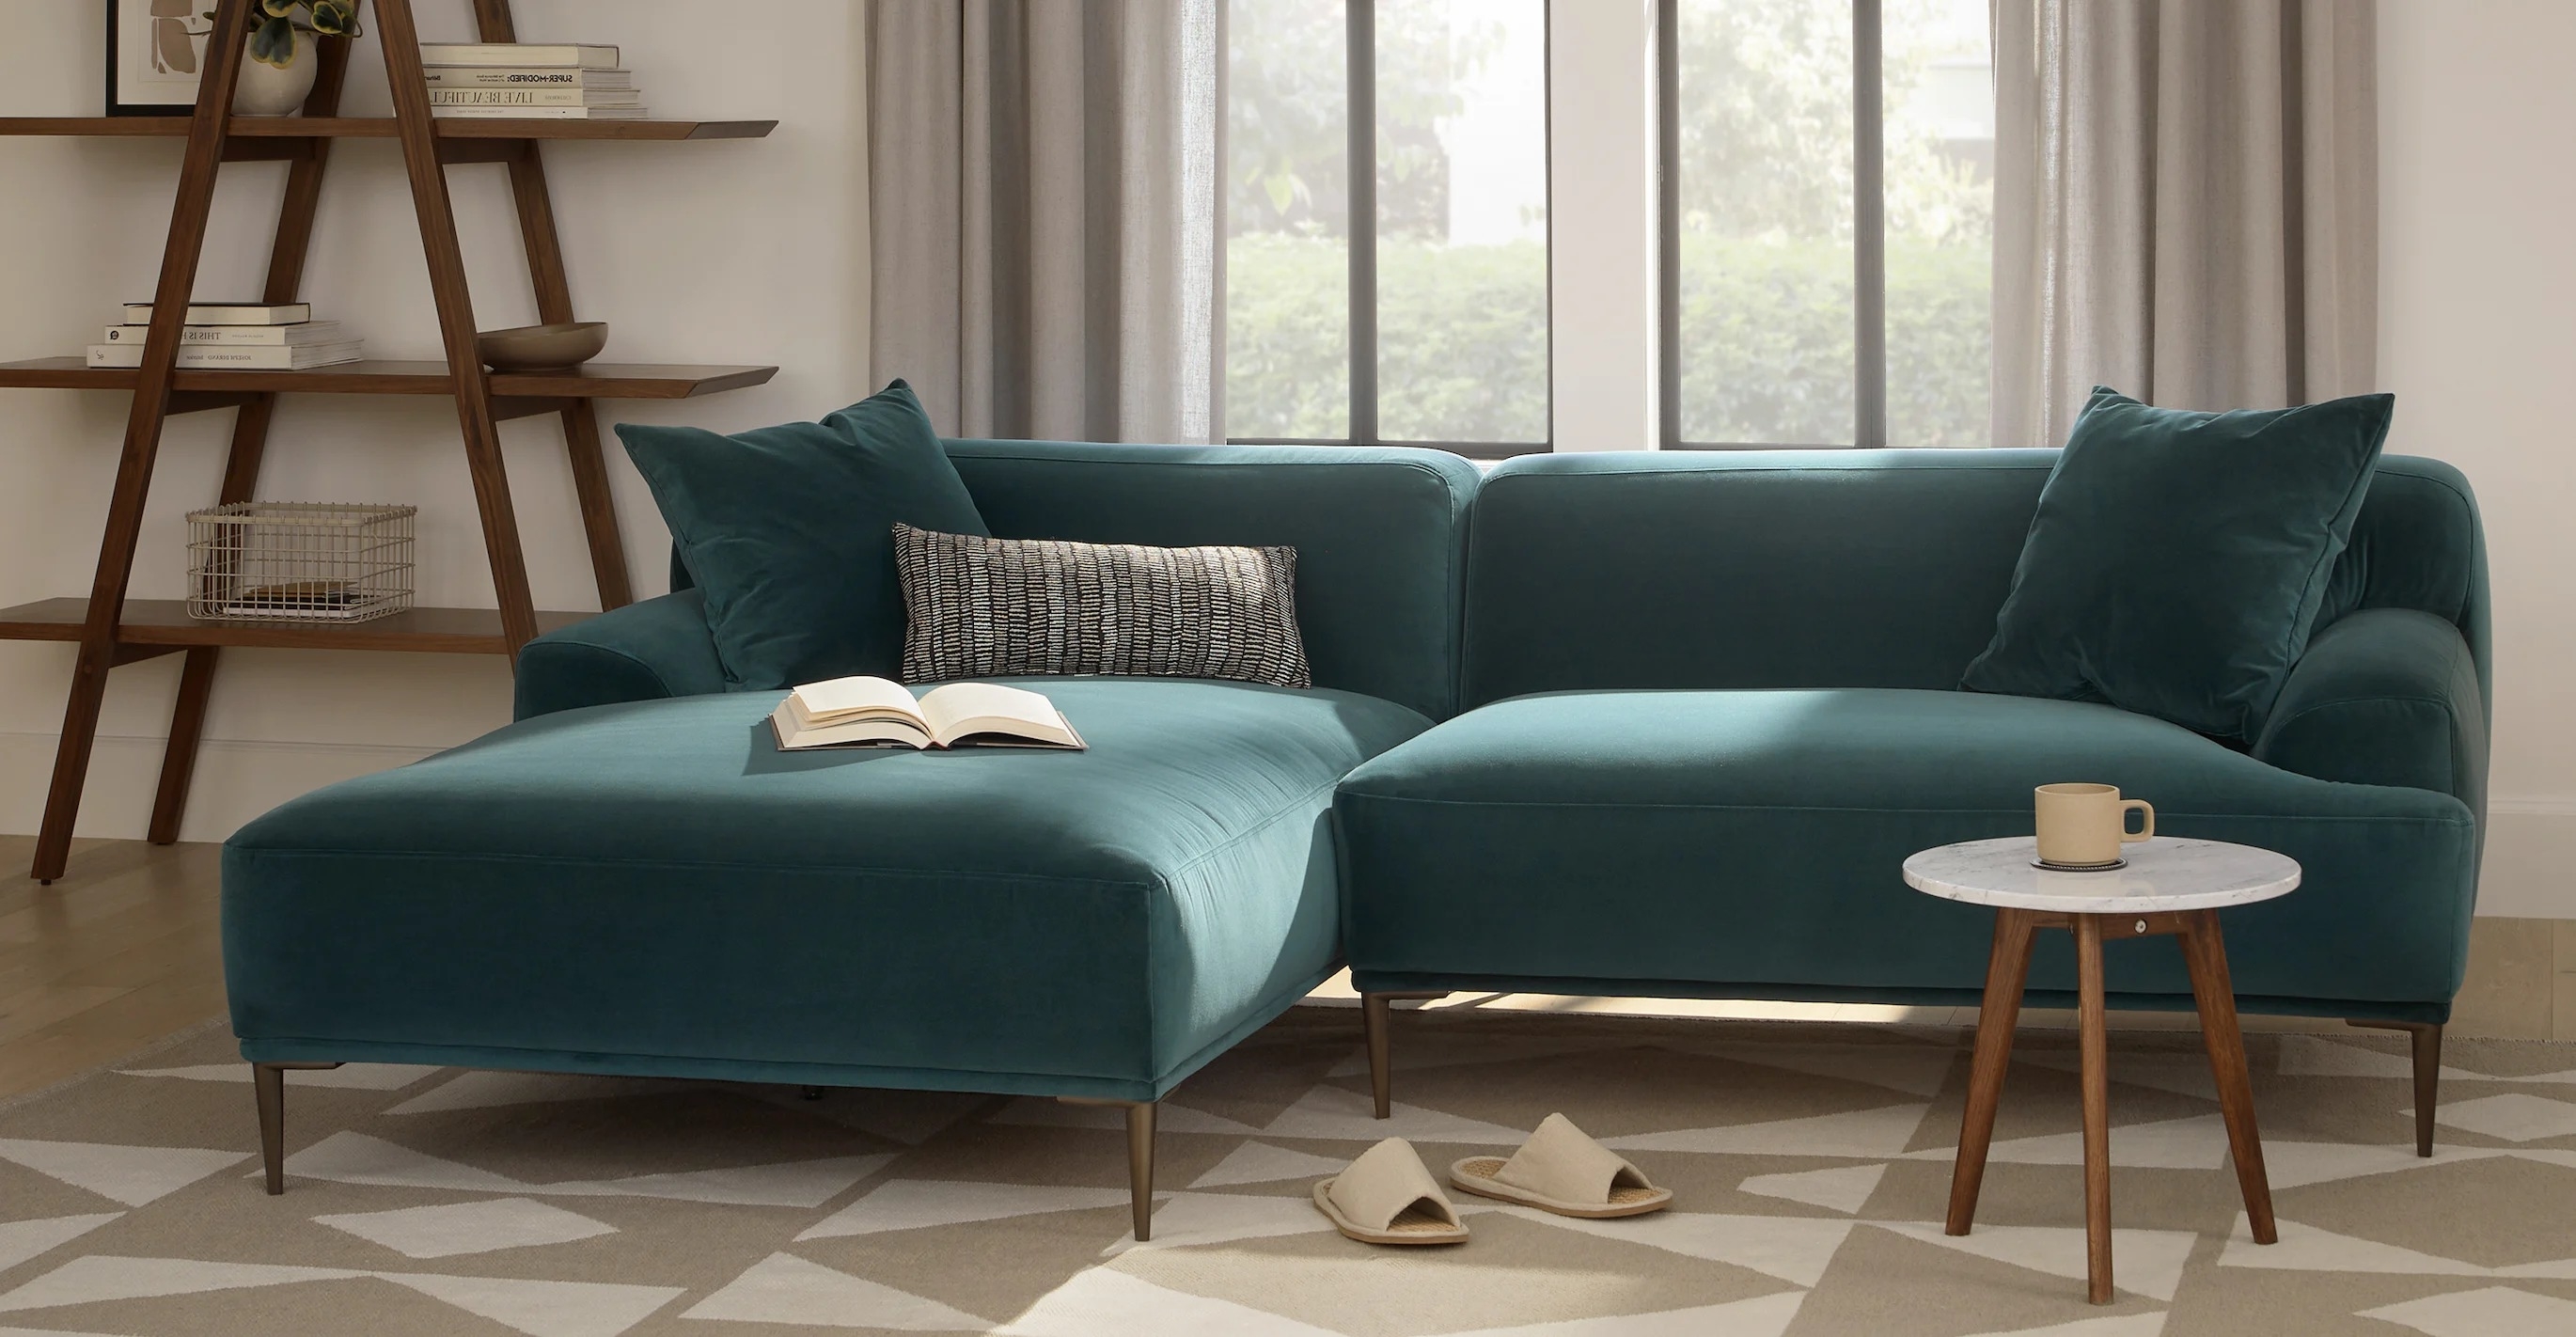 A wide chaise sectional in a living room